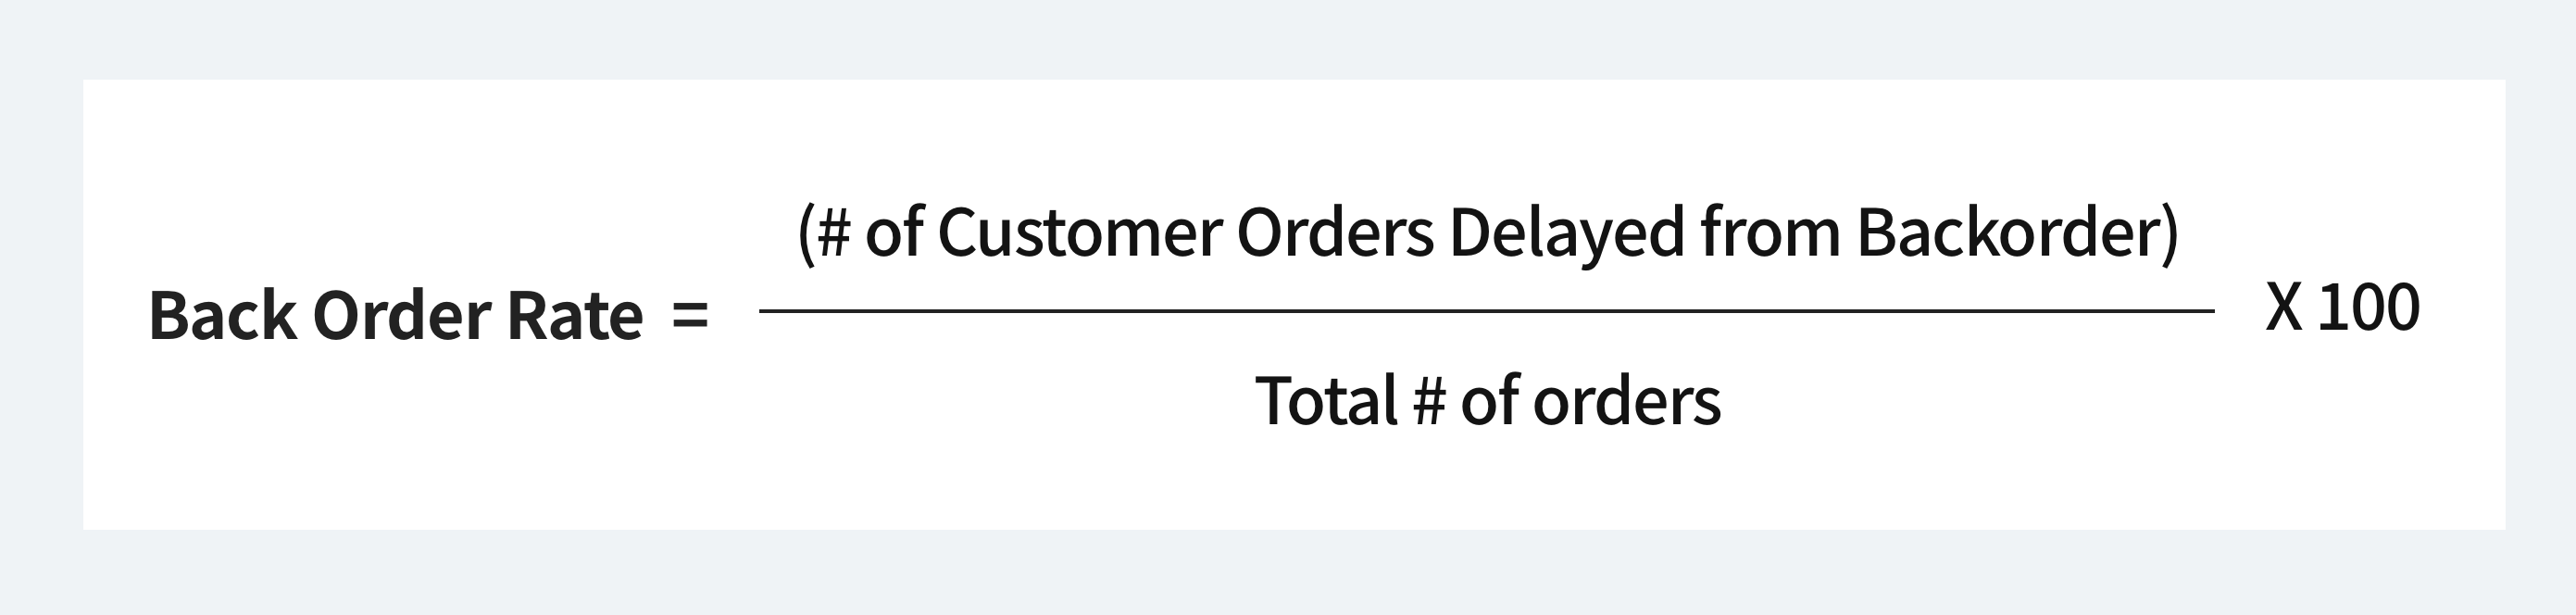 Back Order Rate = (# of Customers Orders Delayed from backorder / Total # of orders) x 100